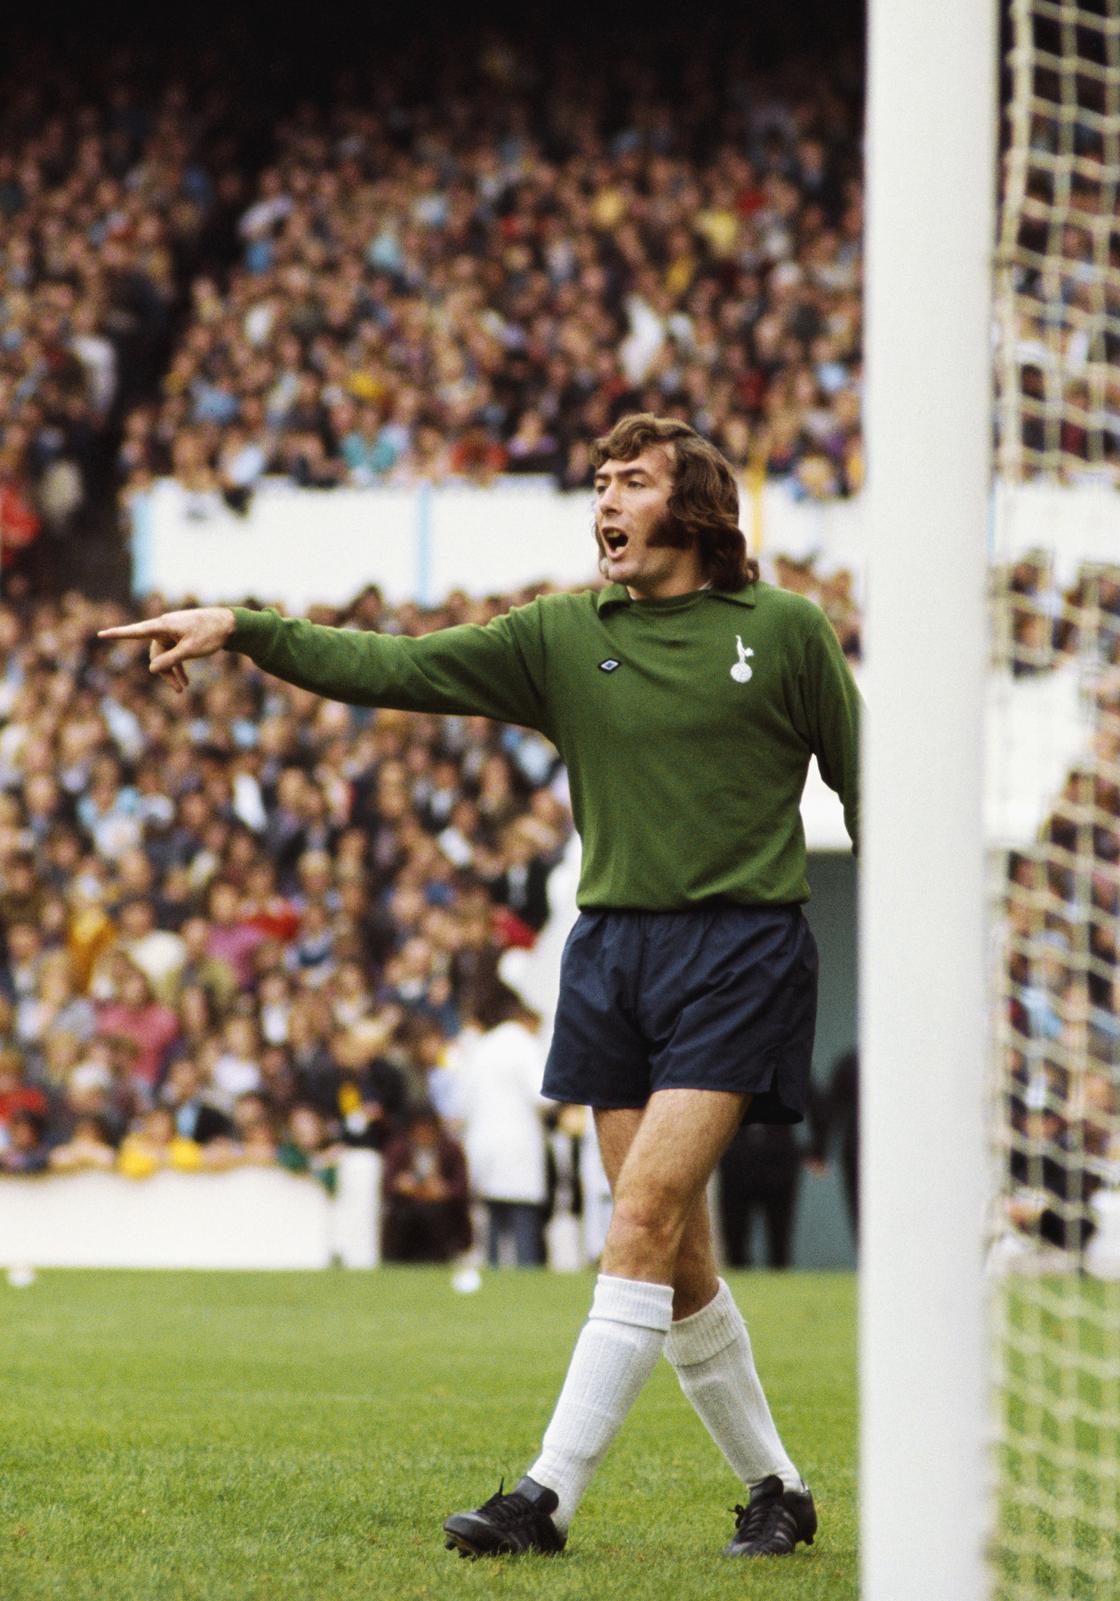 Top 10 Tottenham Hotspurs legends of all time: who is the best?